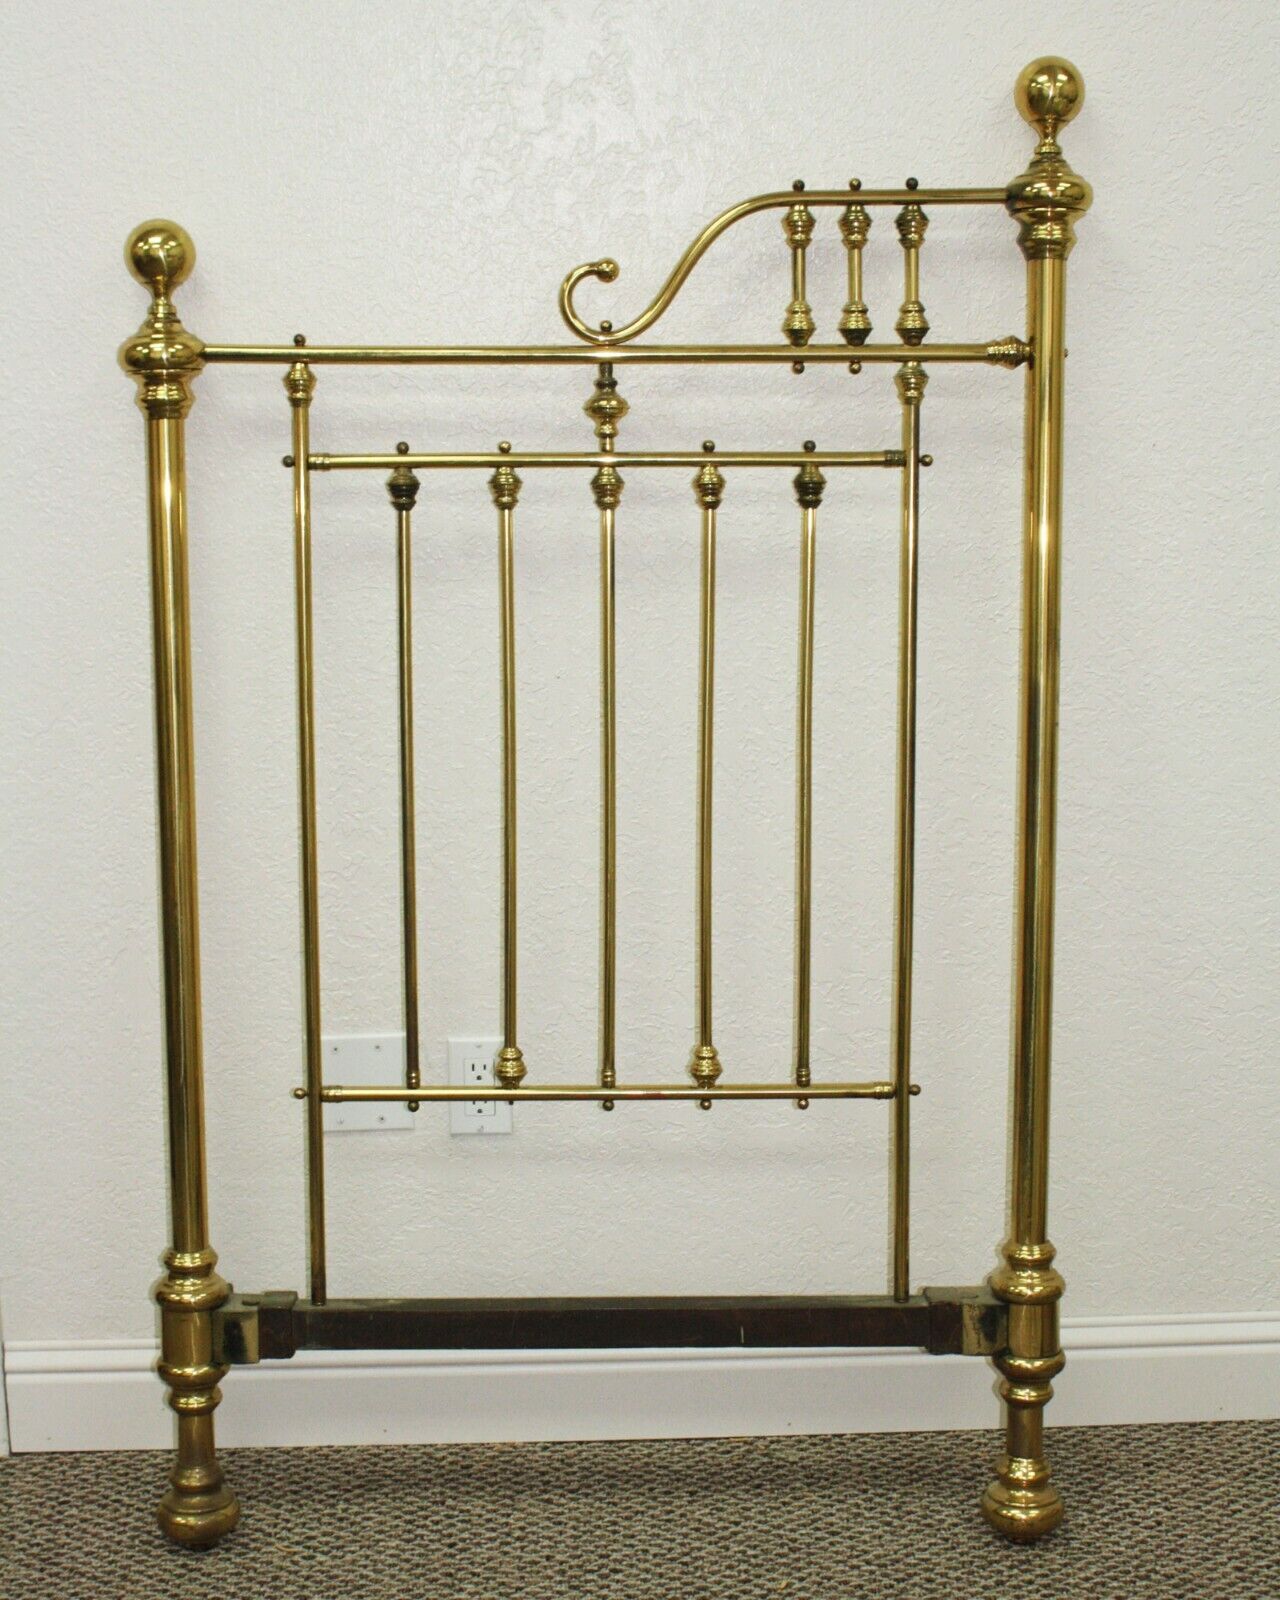 EXTREMELY RARE ANTIQUE PR OF VICTORIAN BRASS TWIN 3/4 BEDS THAT MAKE INTO A KING Без бренда - фотография #9